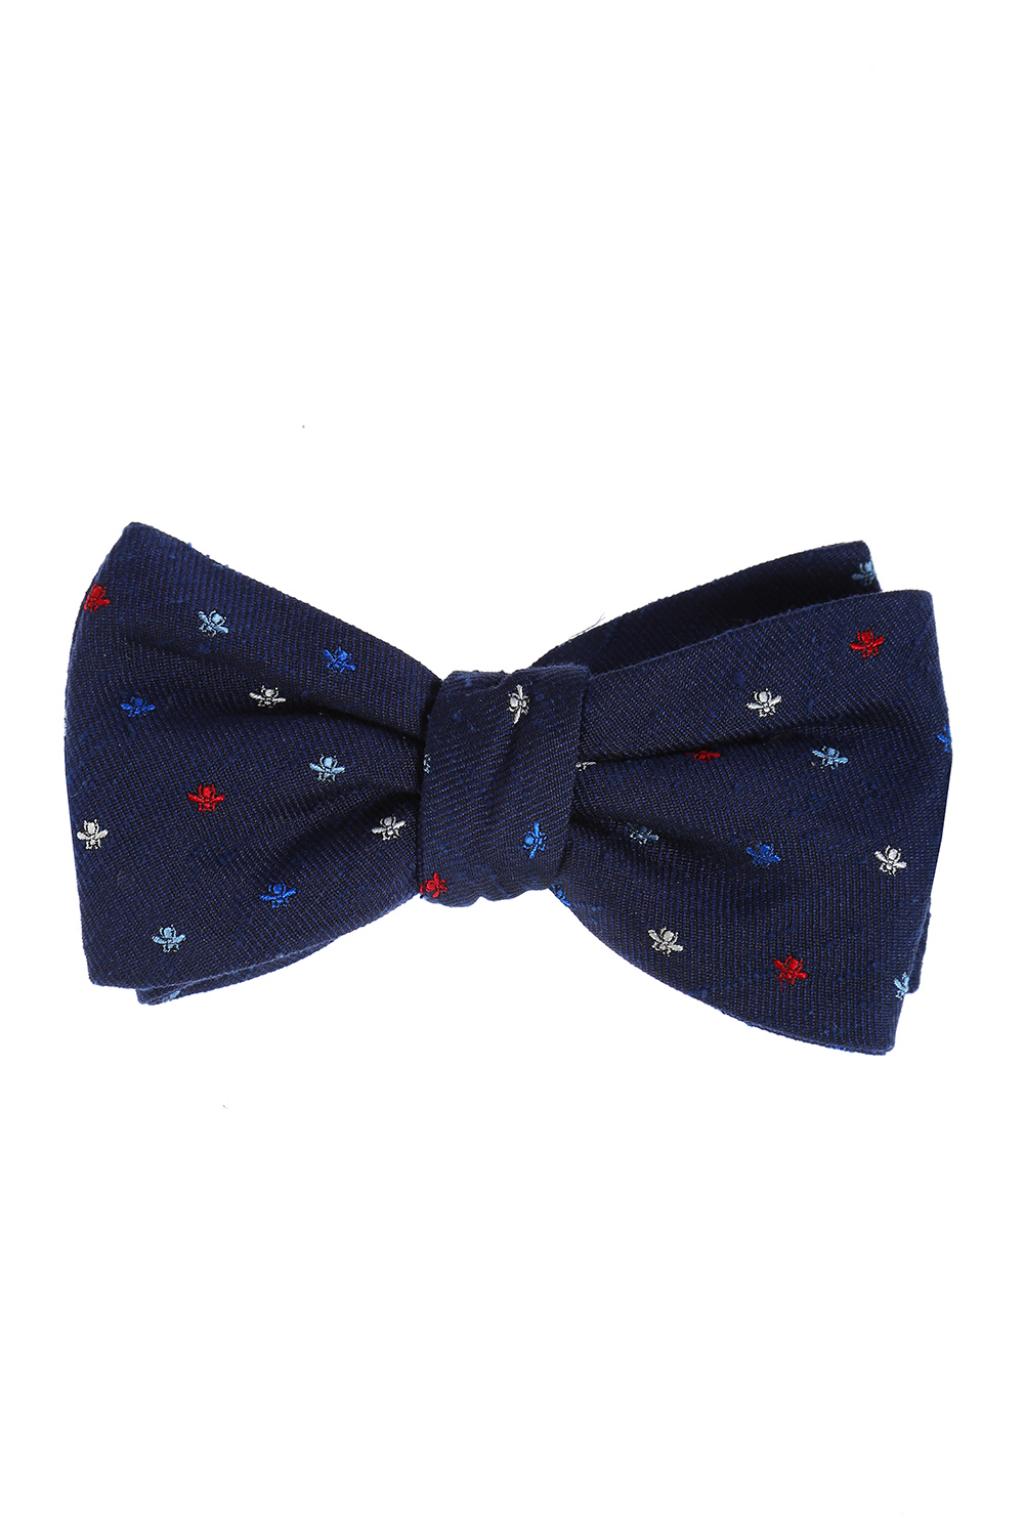 Gucci Patterned bow tie, Men's Accessories